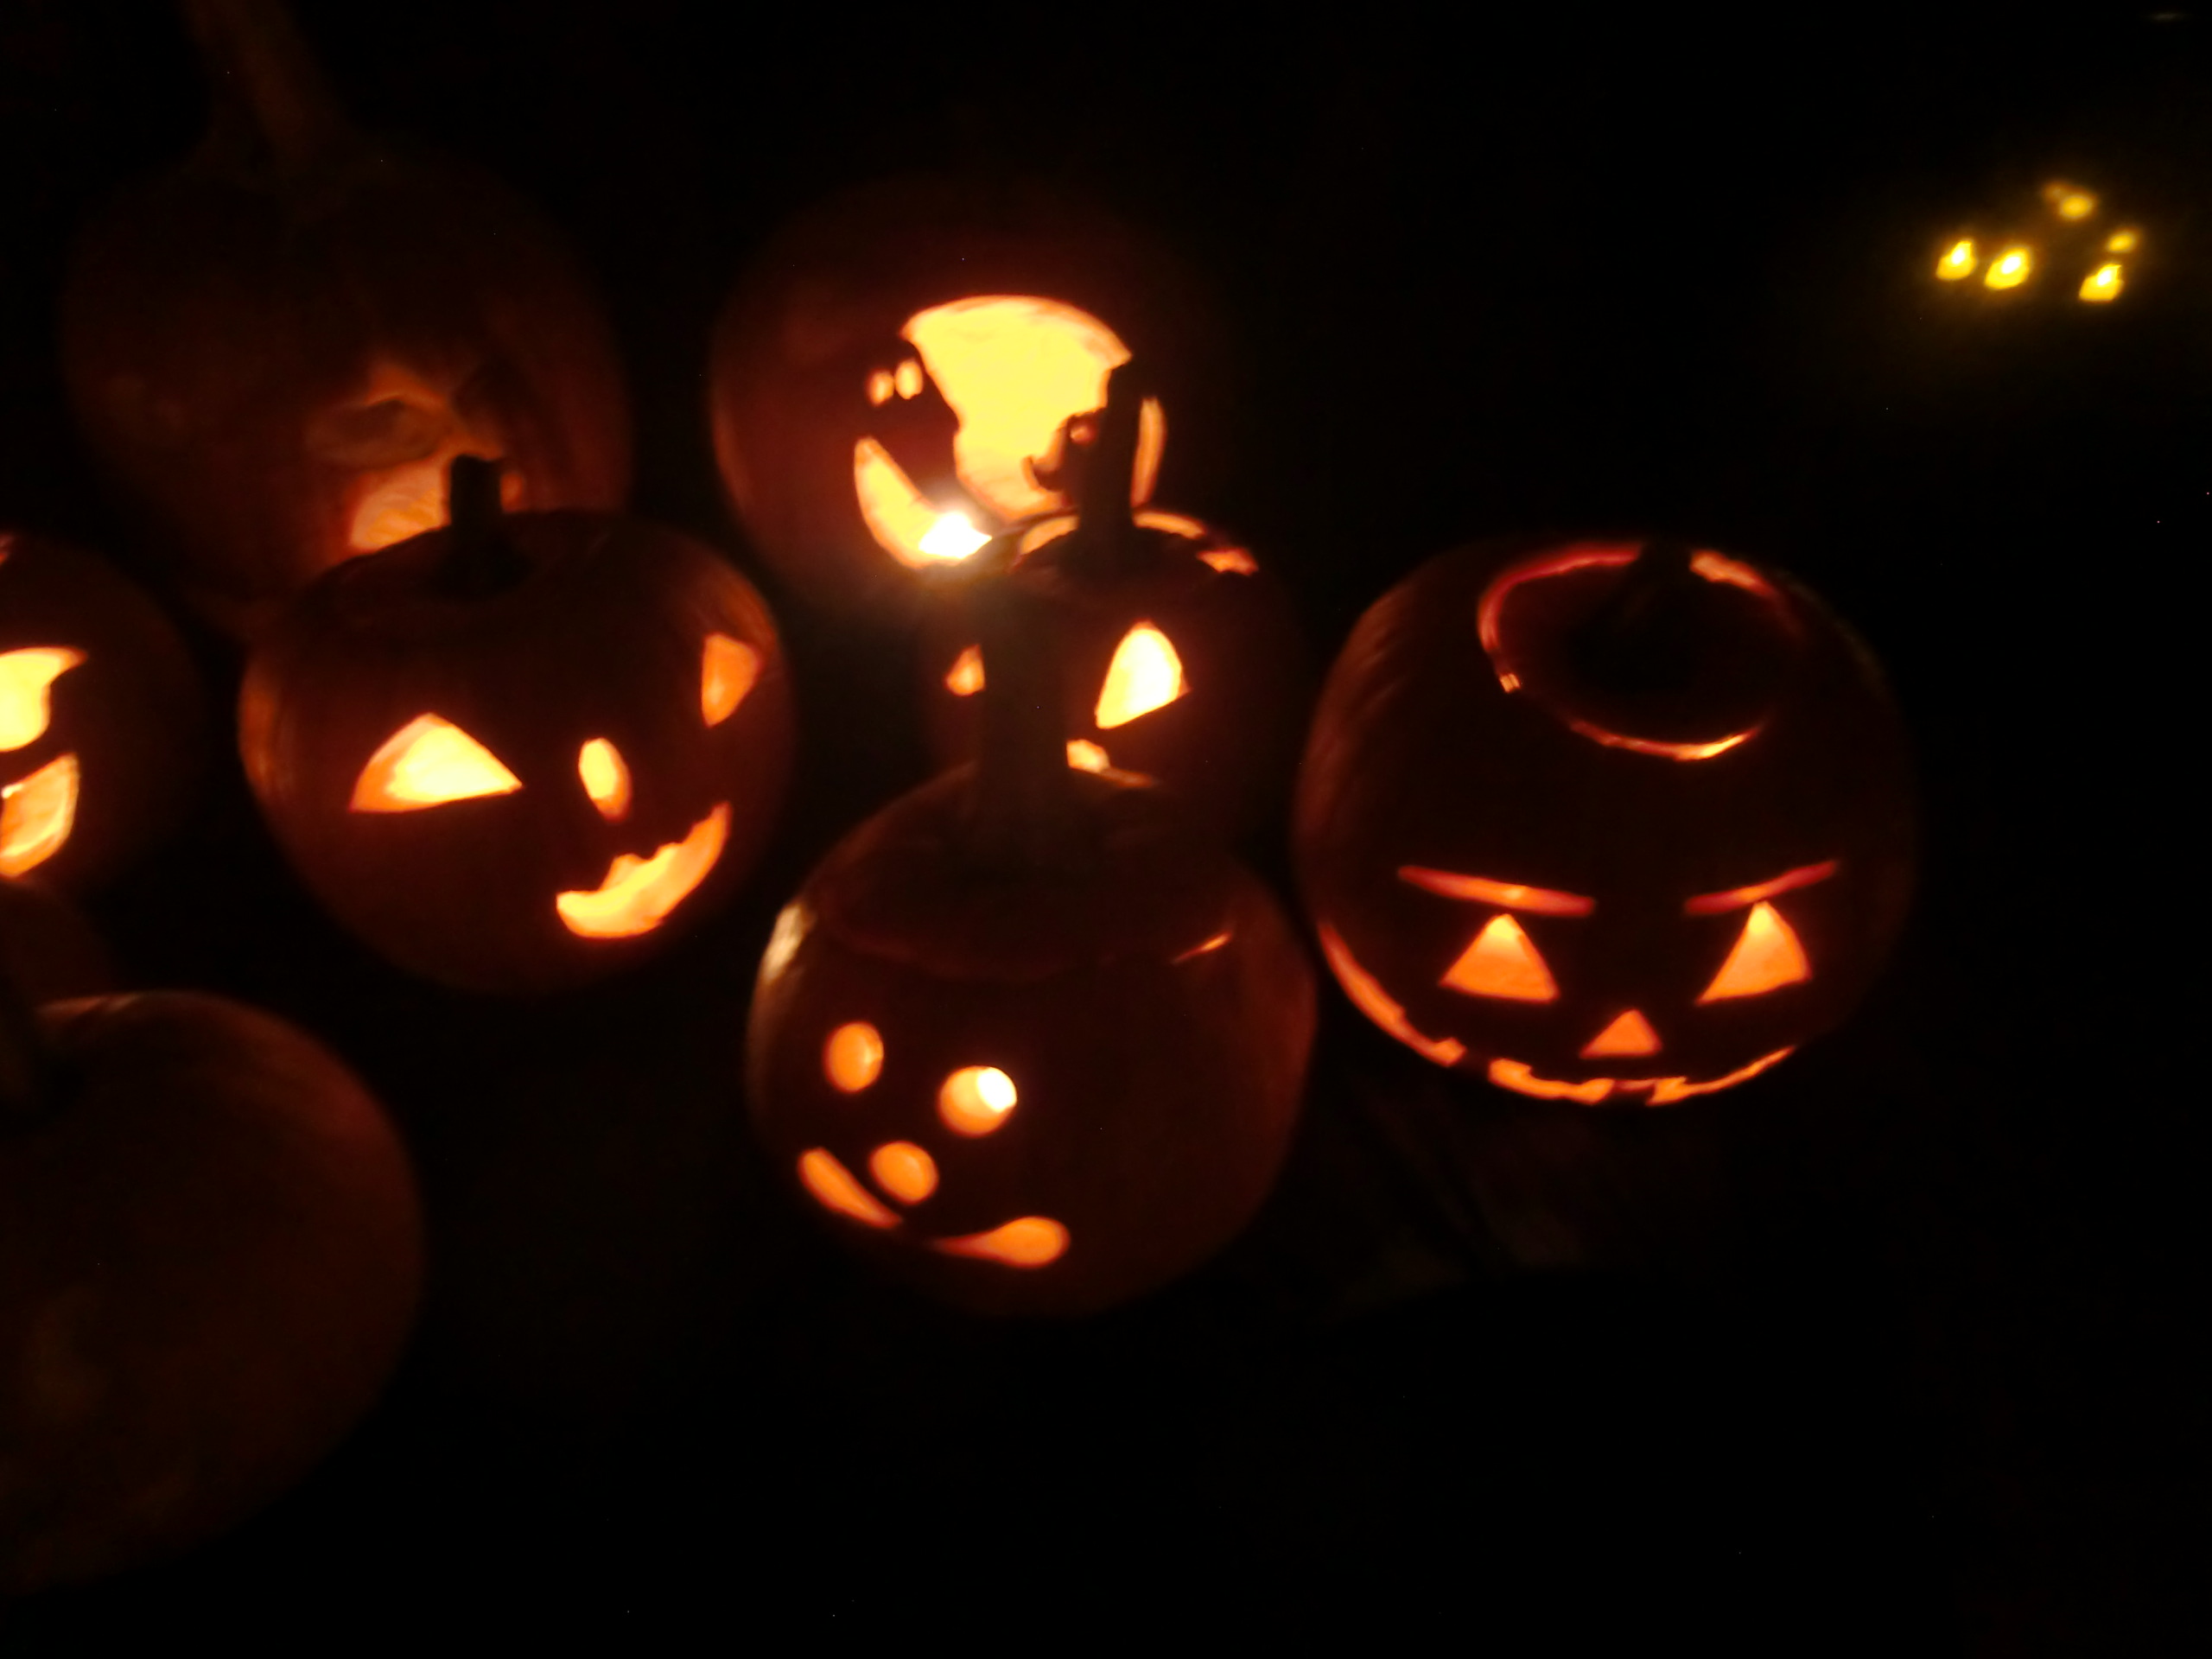 A glimpse of the Pumpkin display at A Hallowed Eve -Highland Hall Waldorf School